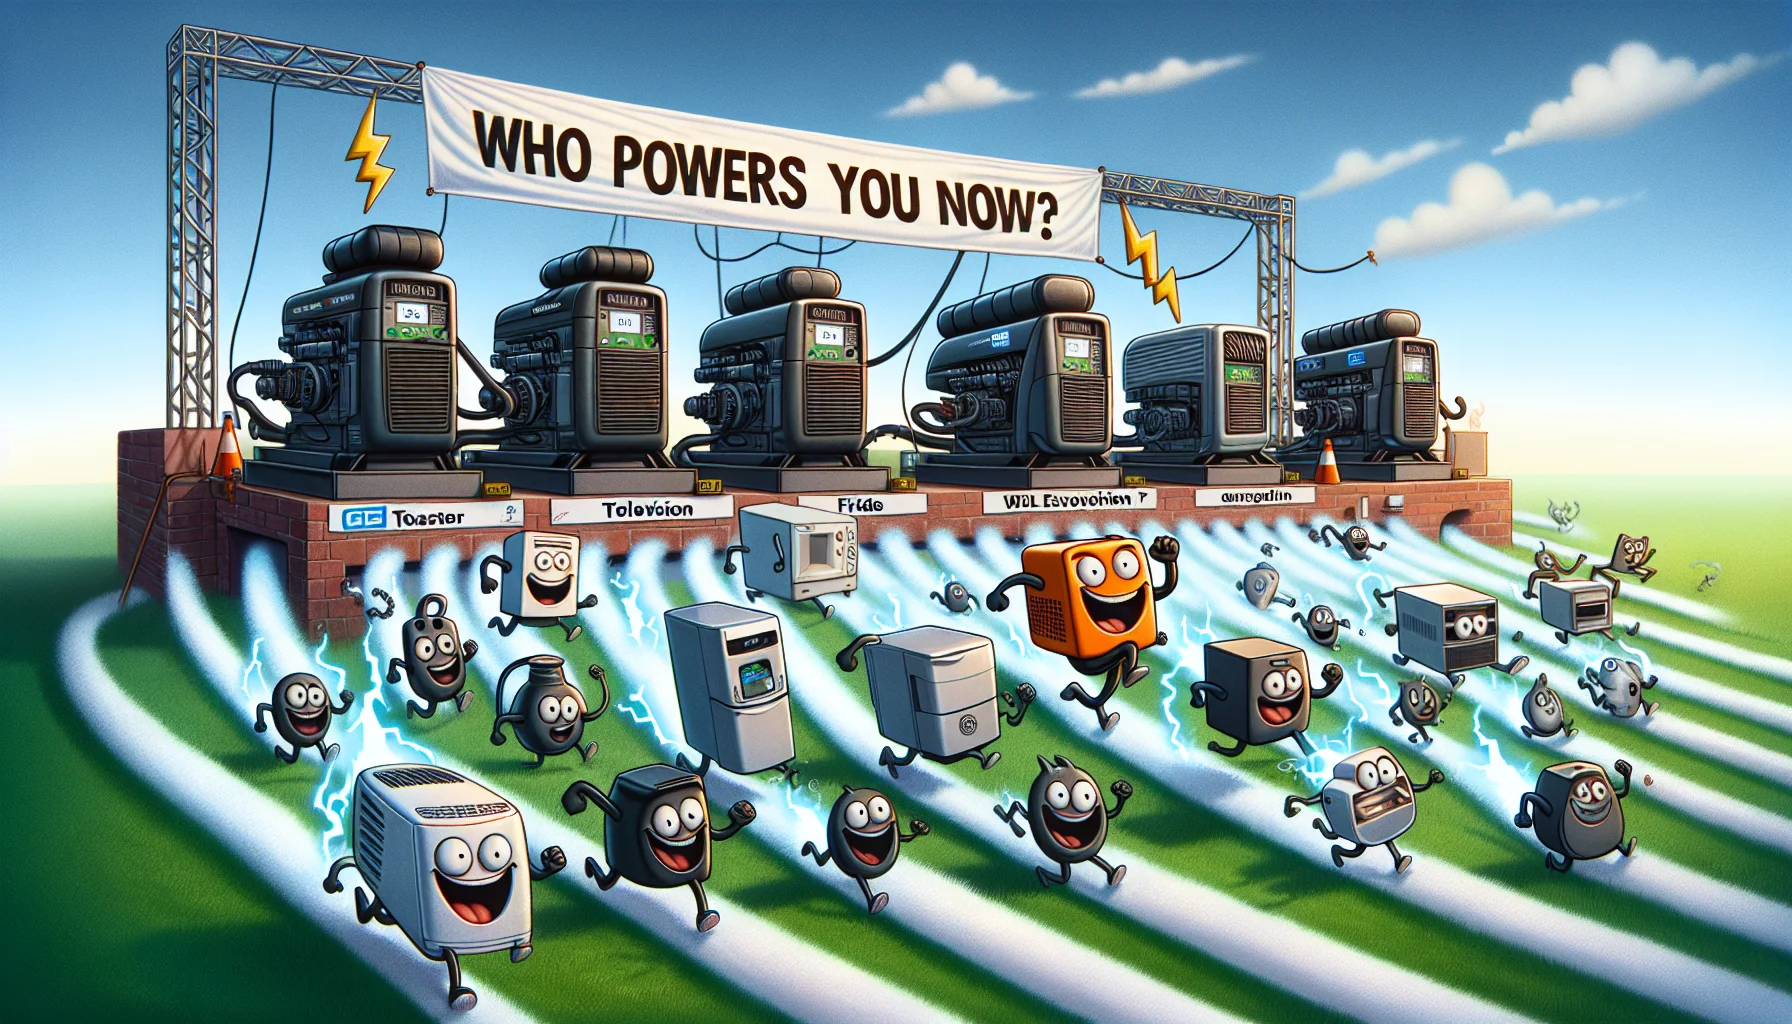 Visualize a humorous scenario where various mid-size, low-cost power generators are personified as lively characters. They are seen participating in a friendly race, with electricity bolts as their trails, symbolizing their purpose of generating electricity. A crowd of different appliances like toaster, television, fridge, fan, each portrayed with comically excited expressions, are cheering them on. The setting is an open field under a clear blue sky. The winning generator crosses a banner that reads 'Who powers you now?'. The overall scene should evoke a sense of fun and excitement about generating electricity.